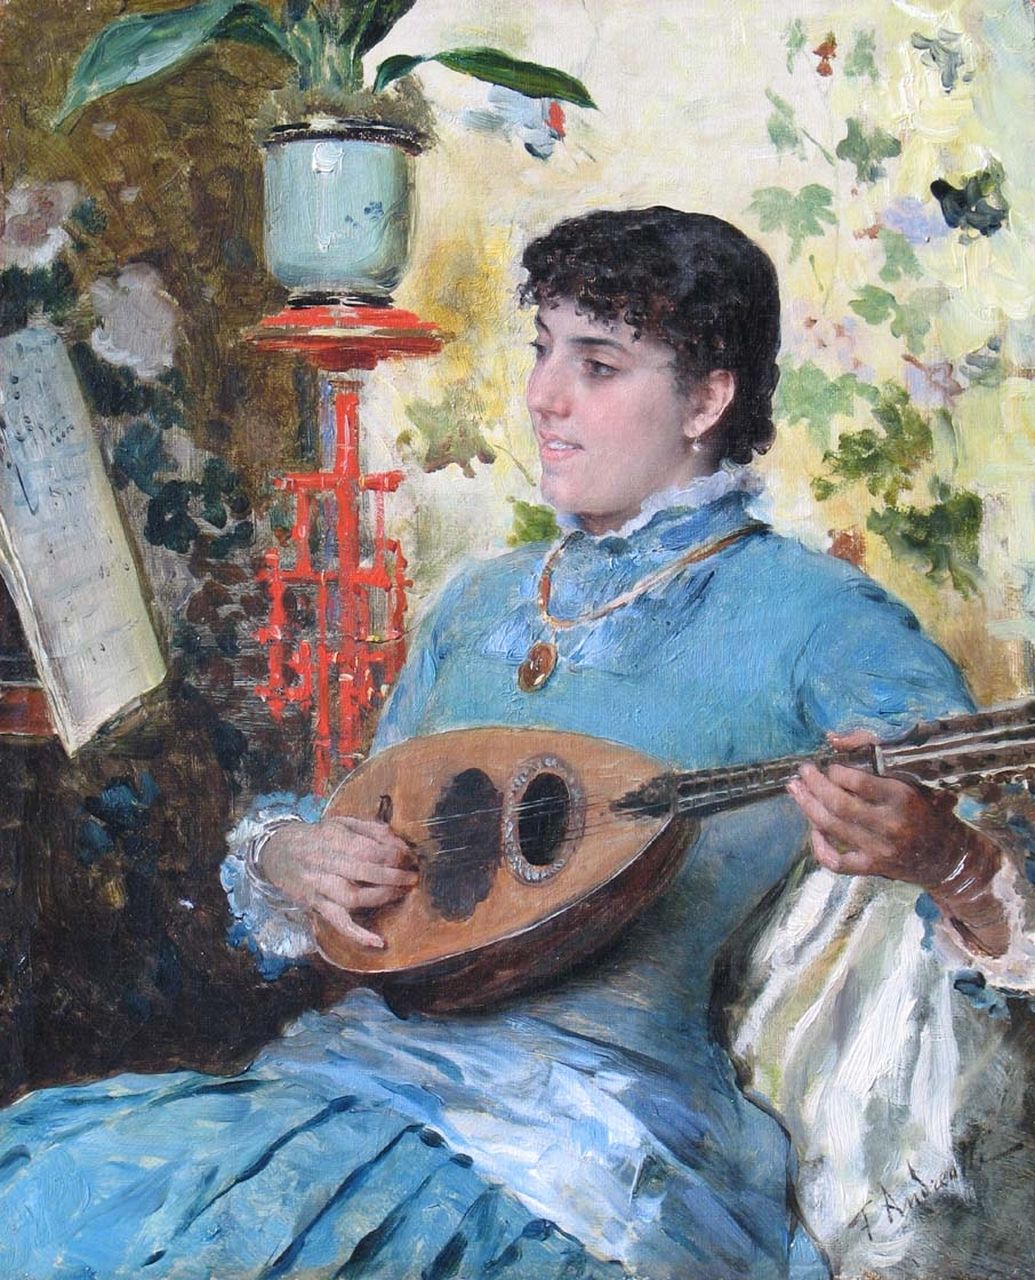 Federigo Andreotti | The lute-player, oil on canvas, 31.1 x 25.6 cm, signed l.r.